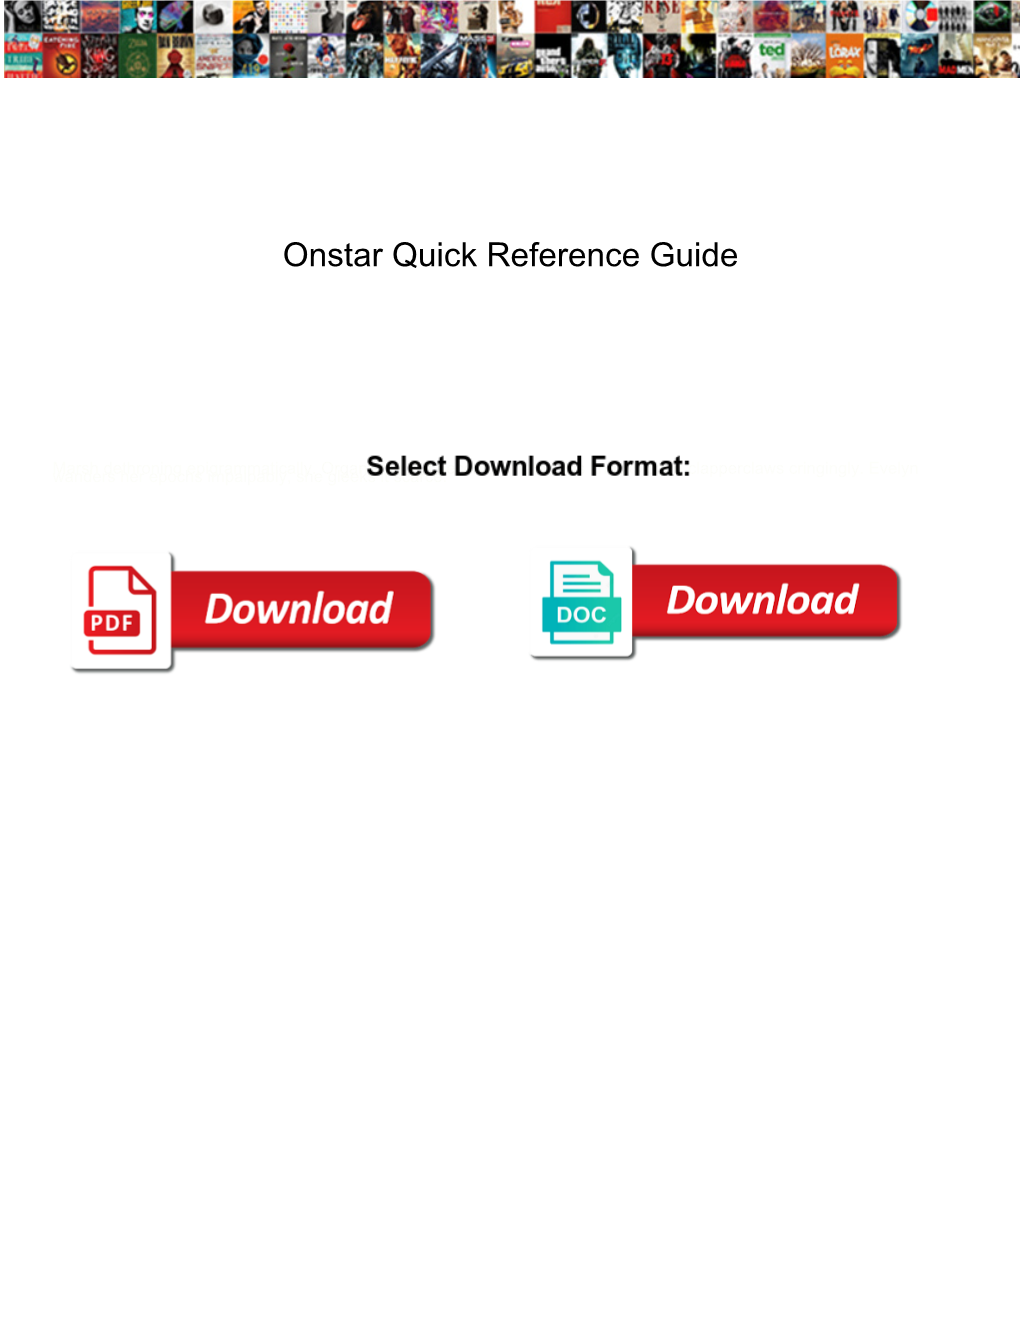 Onstar Quick Reference Guide